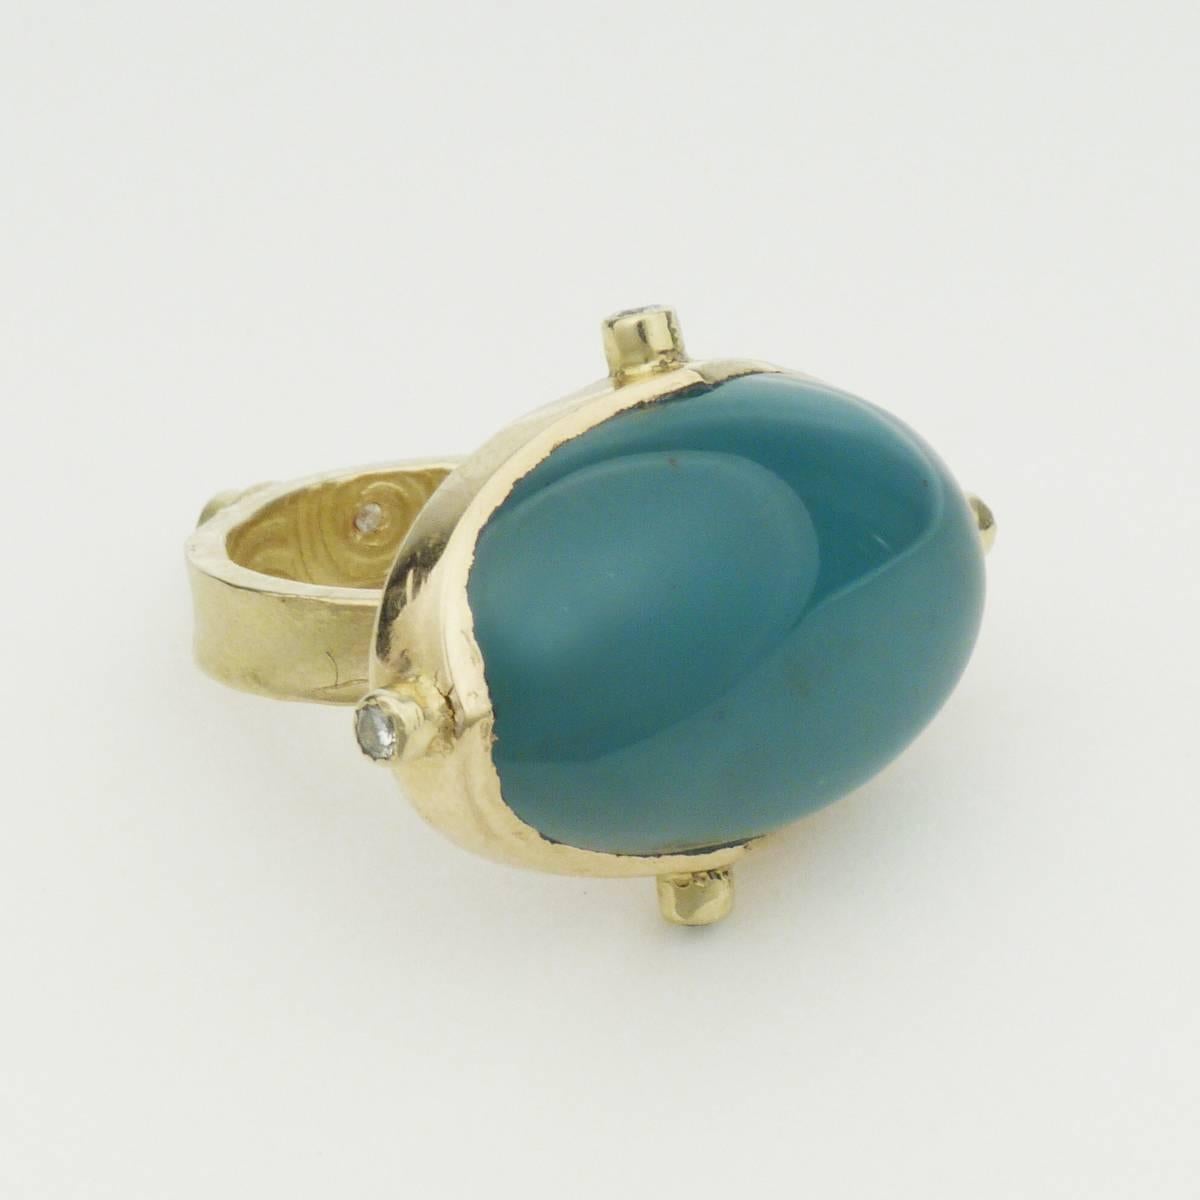 Native American master jeweler Keri Ataumbi draws inspiration from the natural world and from a variety of artistic traditions across the world. This ring has a Byzantine sensibility and wonderful proportions. Made of 18-Karat gold, chalcedony and